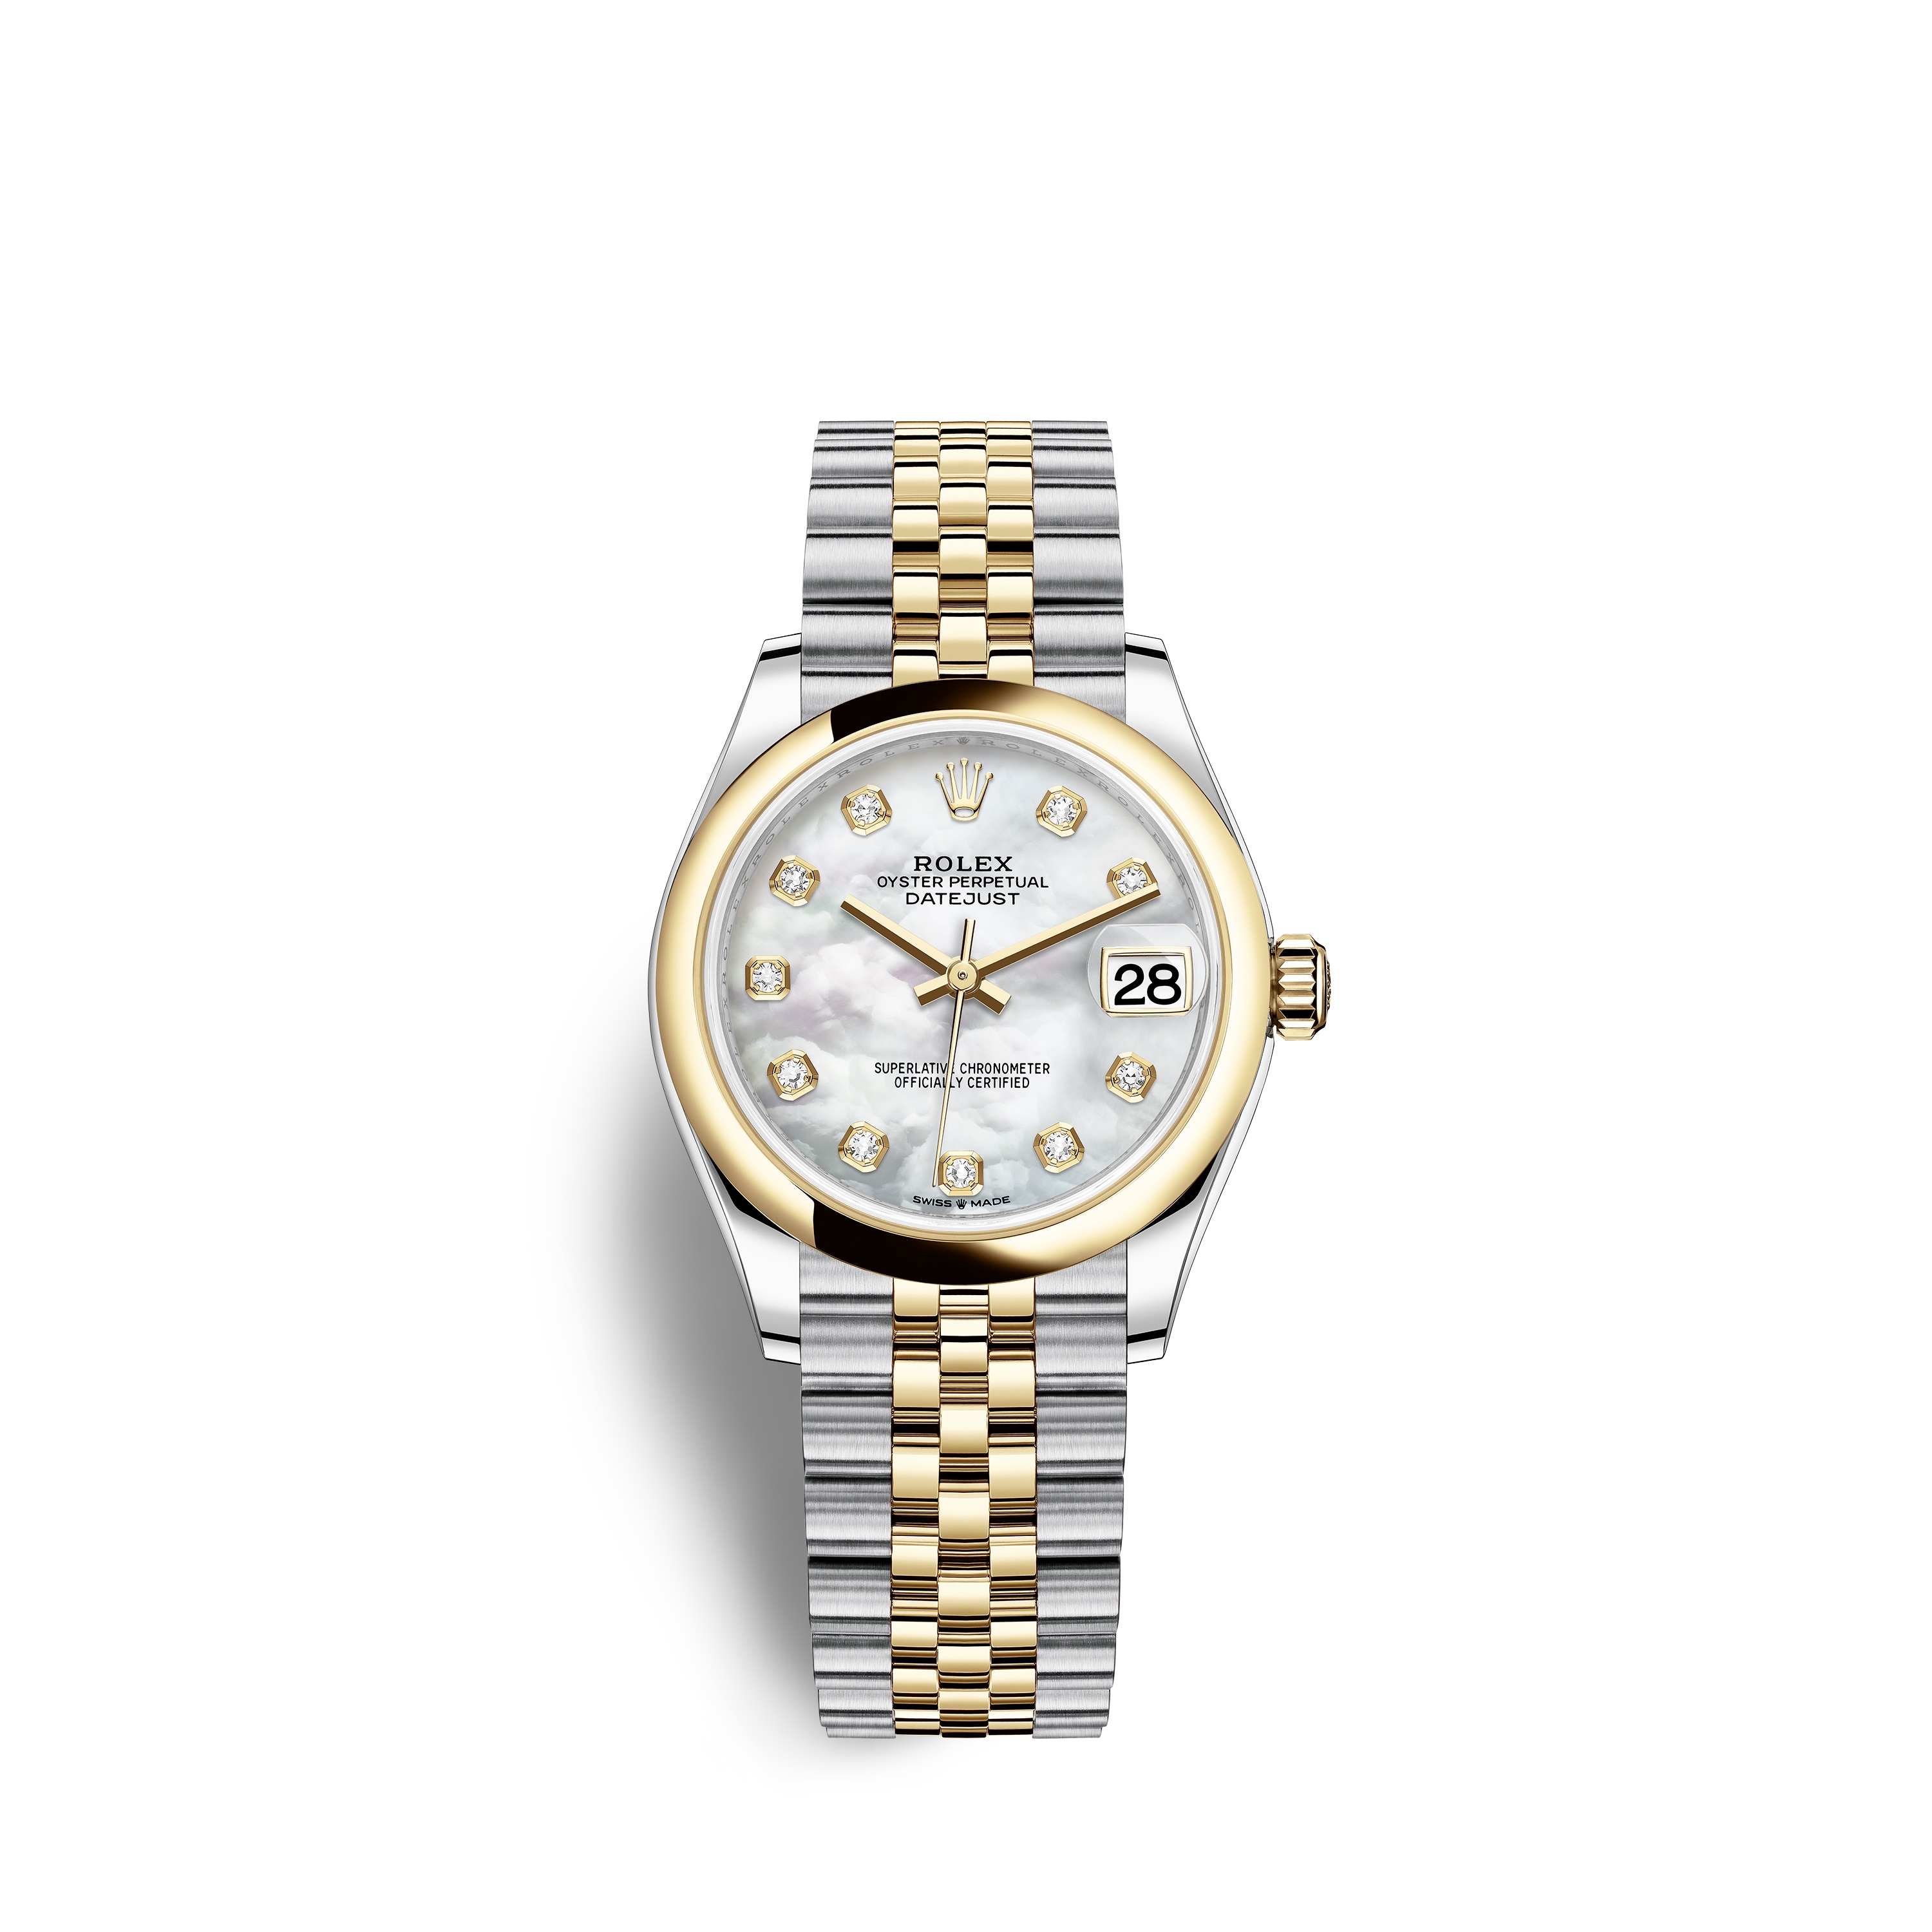 Datejust 31 278243 Gold & Stainless Watch (White Mother-of-Pearl Set with Diamonds)